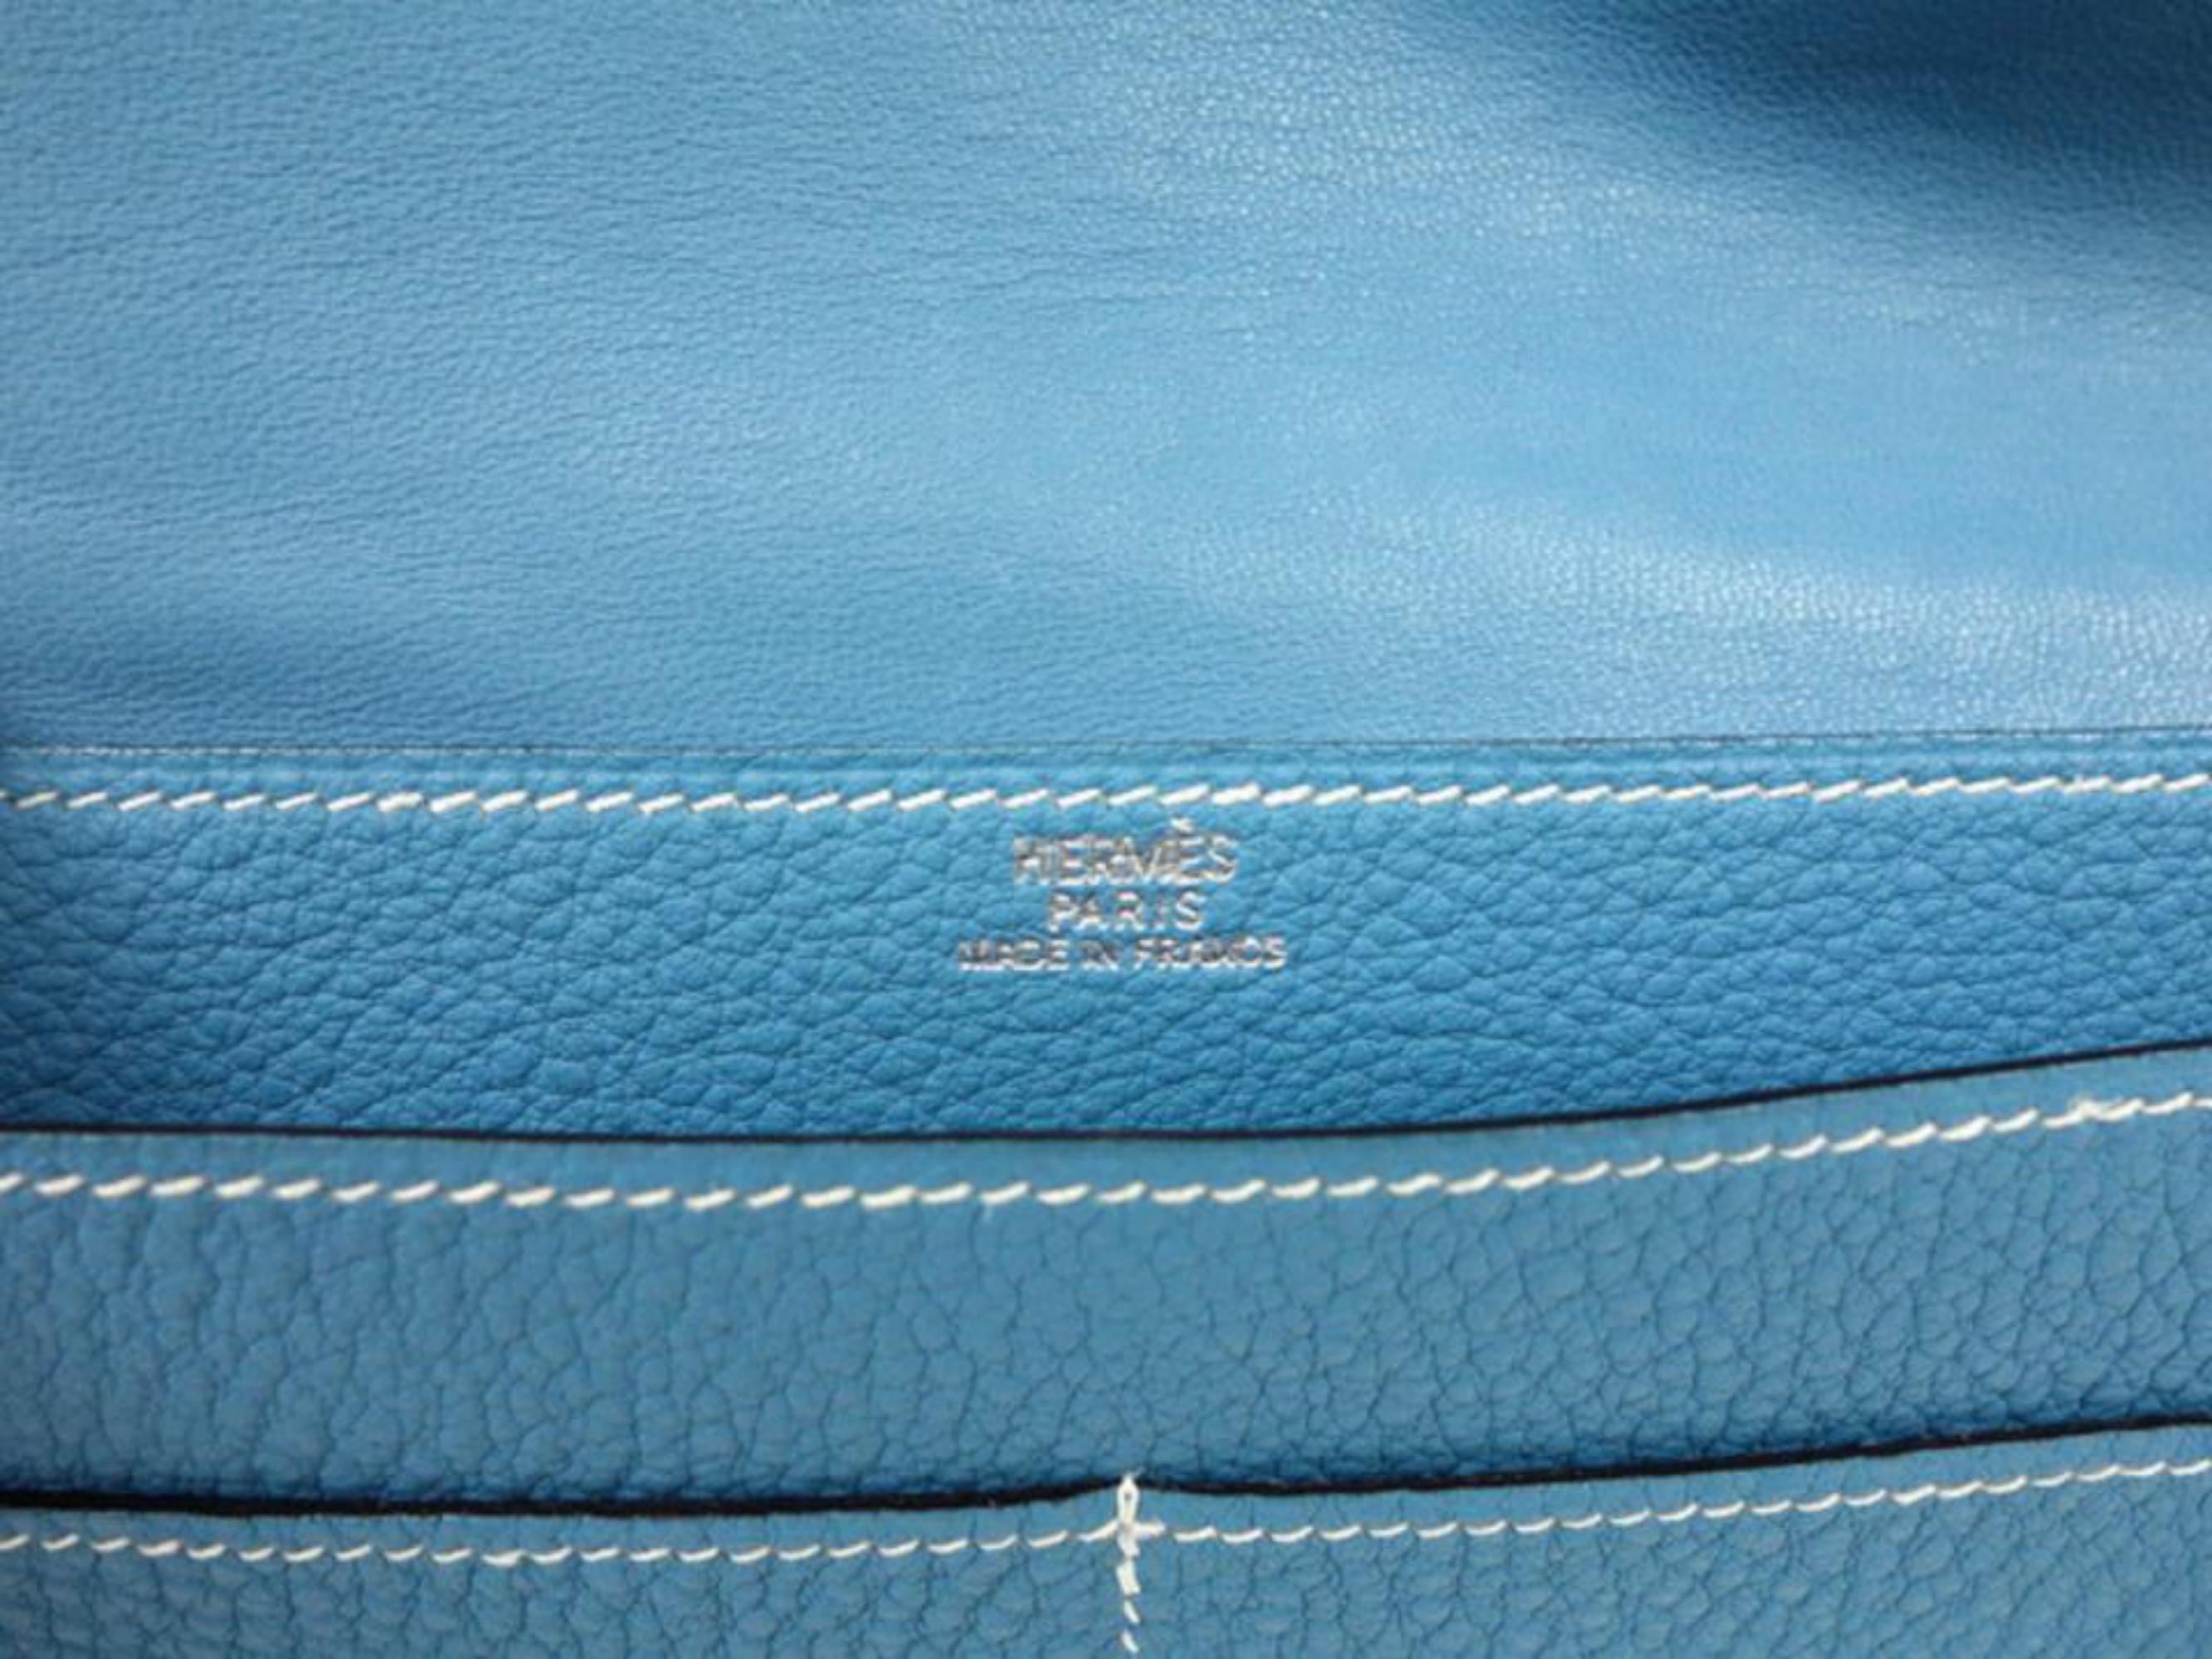 Hermès Jean Dogon Fanny Pack Belt Waist Pouch 233789 Blue Leather Cross Body Bag In Excellent Condition For Sale In Forest Hills, NY